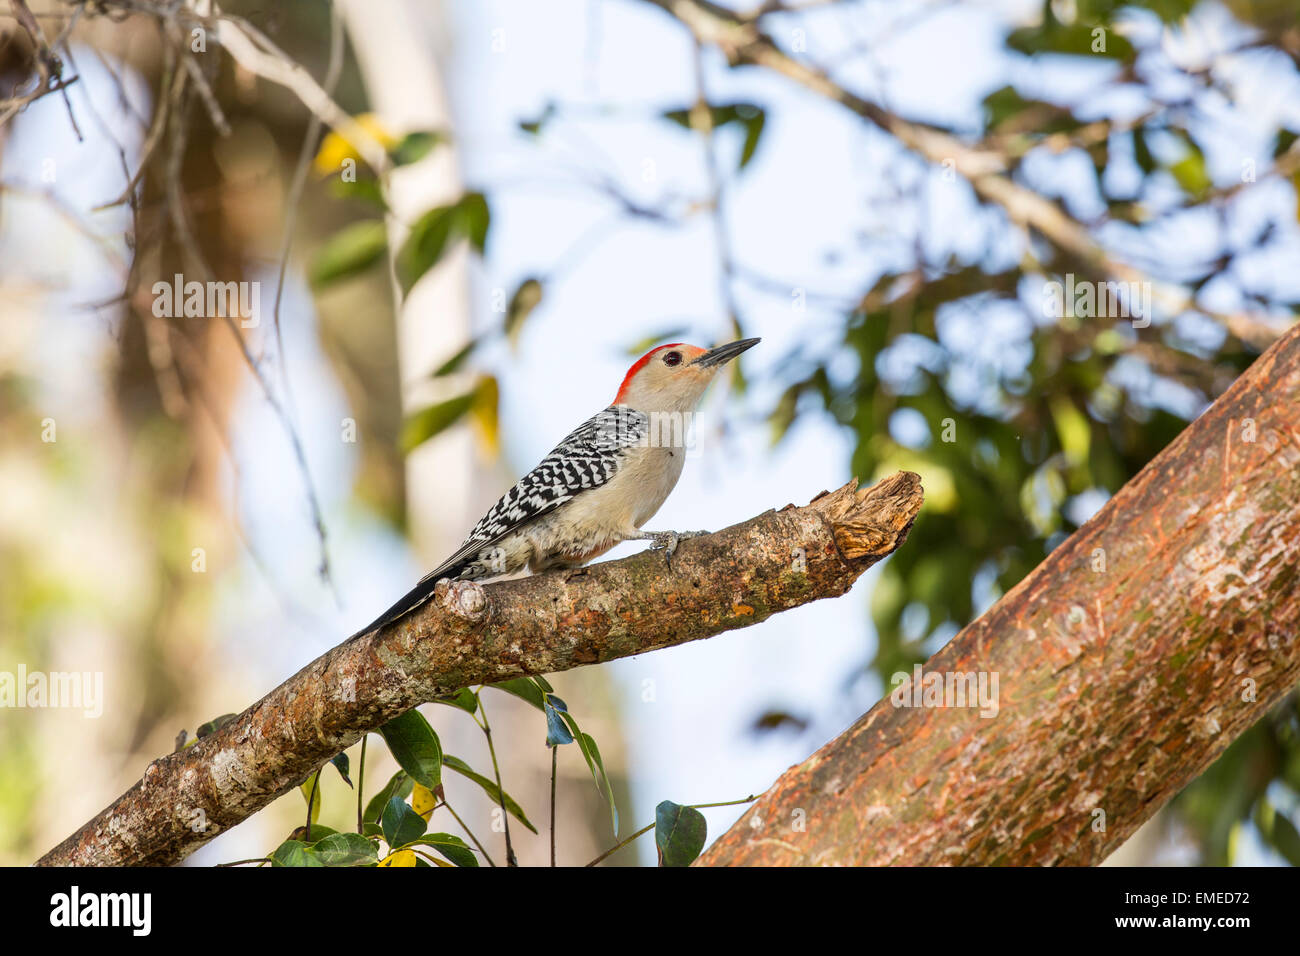 Red-bellied Woodpecker (Melanerpes carolinus) foraging in the Florida Everglades National Park, USA. Stock Photo